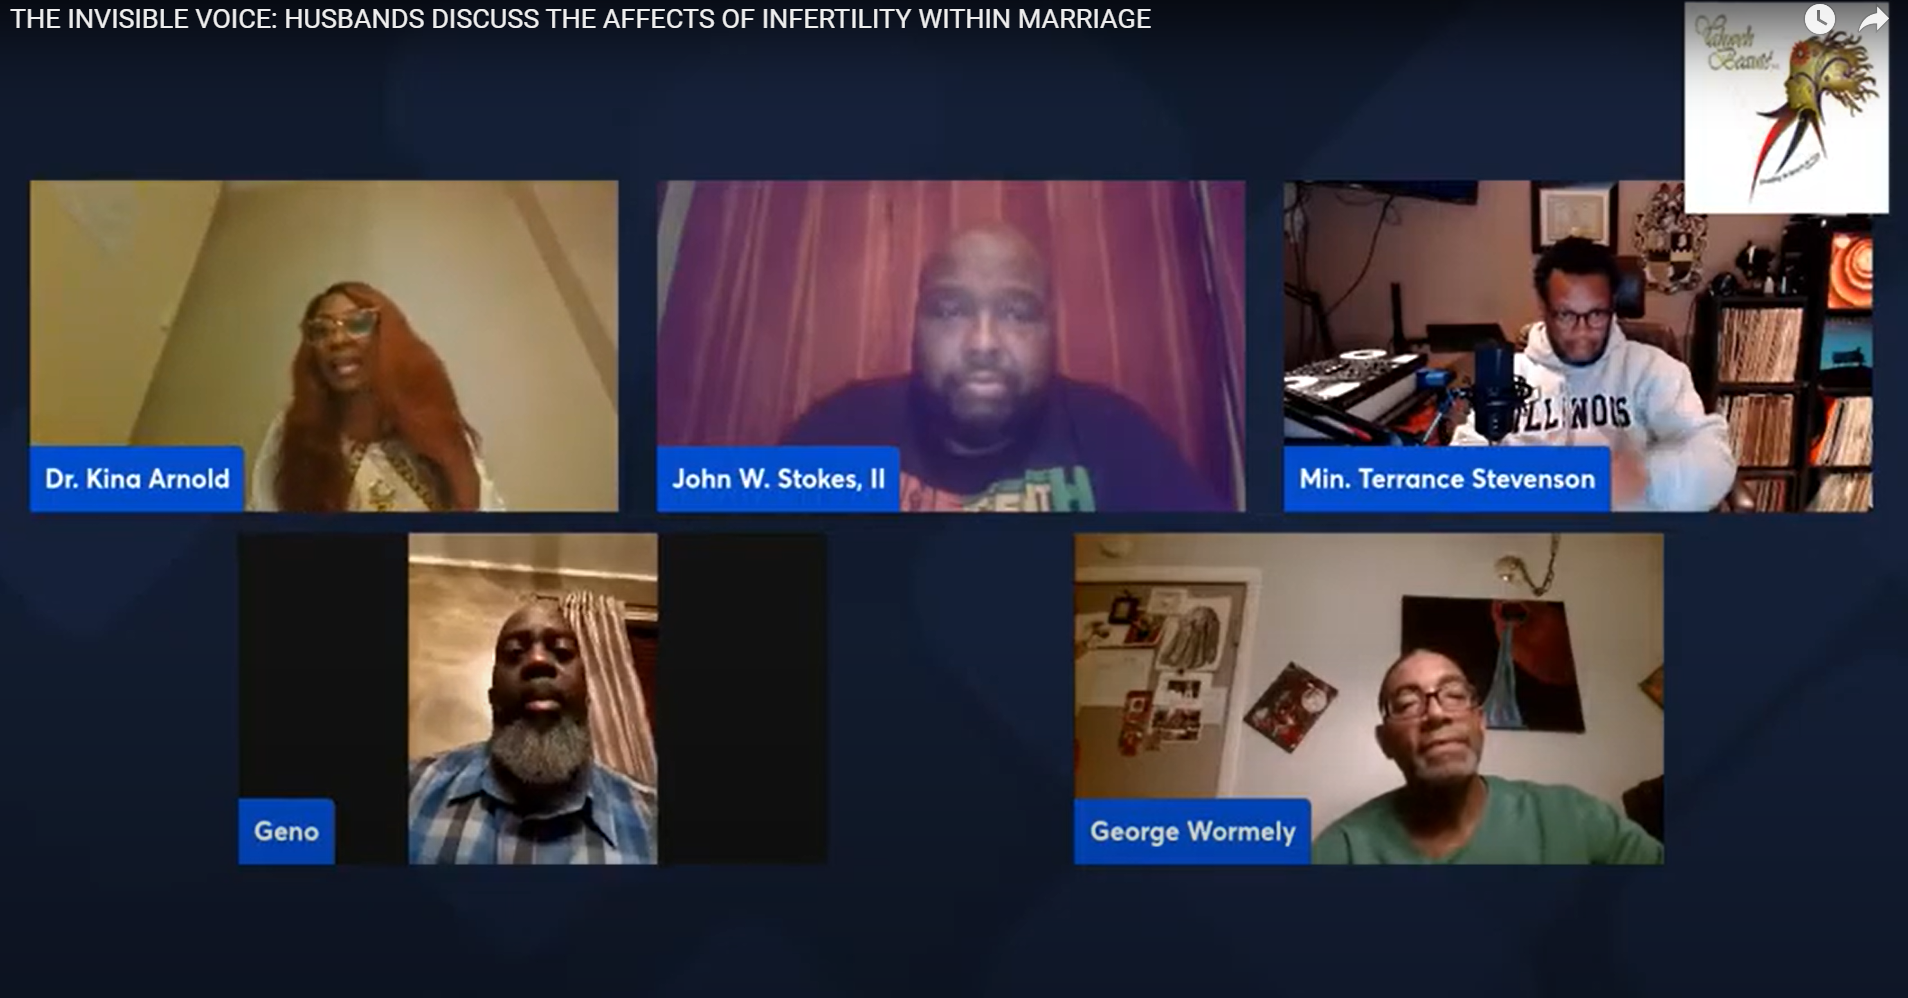 THE INVISIBLE VOICE: HUSBANDS DISCUSS THE AFFECTS OF INFERTILITY WITHIN MARRIAGE